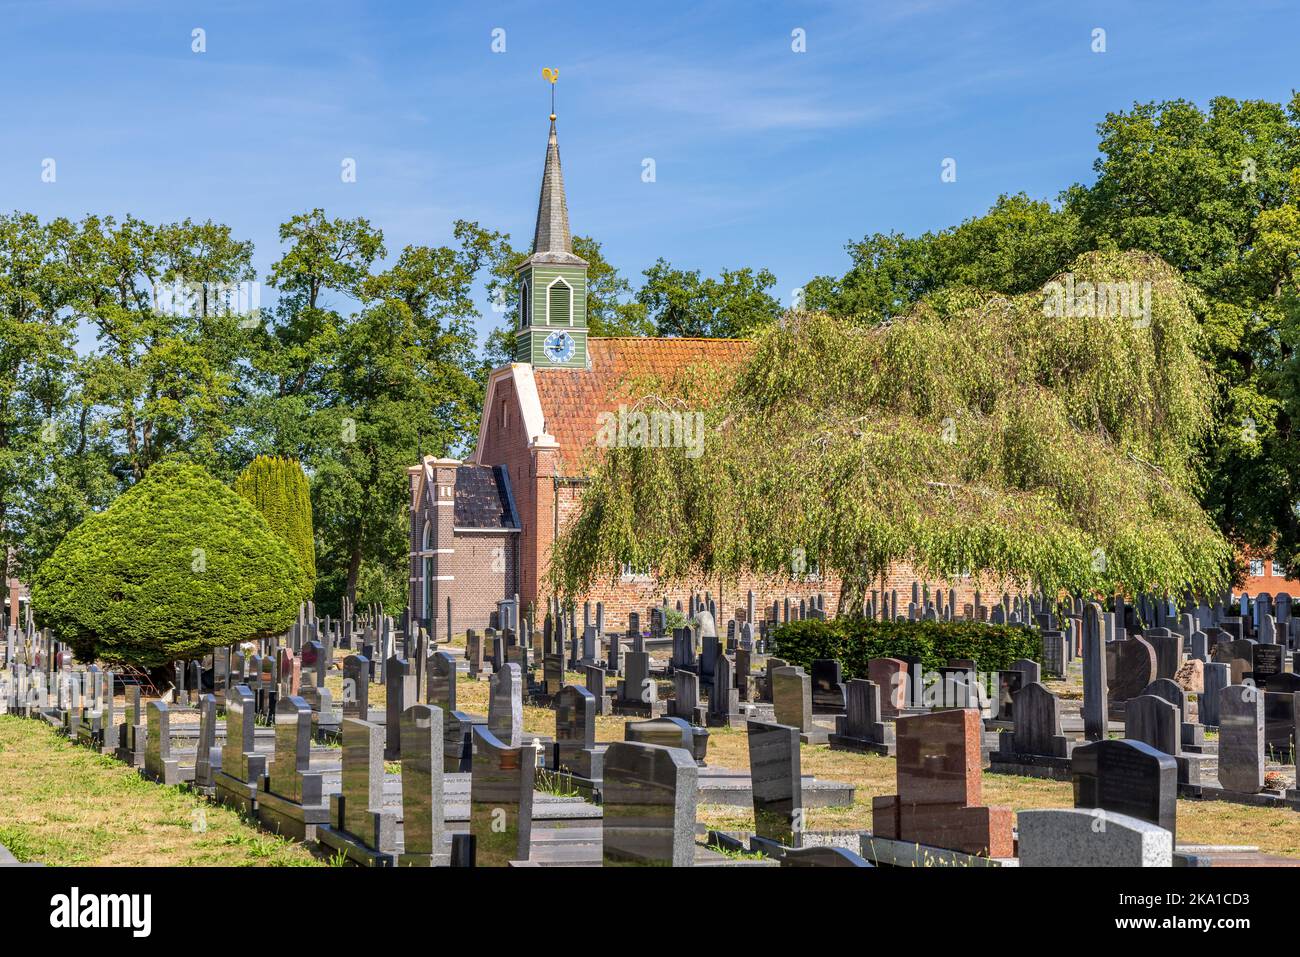 Nuis, The Netherlands - September 2, 2022: Roman gothic church with graveyard in Nuis in municipality Westerkwartier in Groningen province the Netherlands Stock Photo